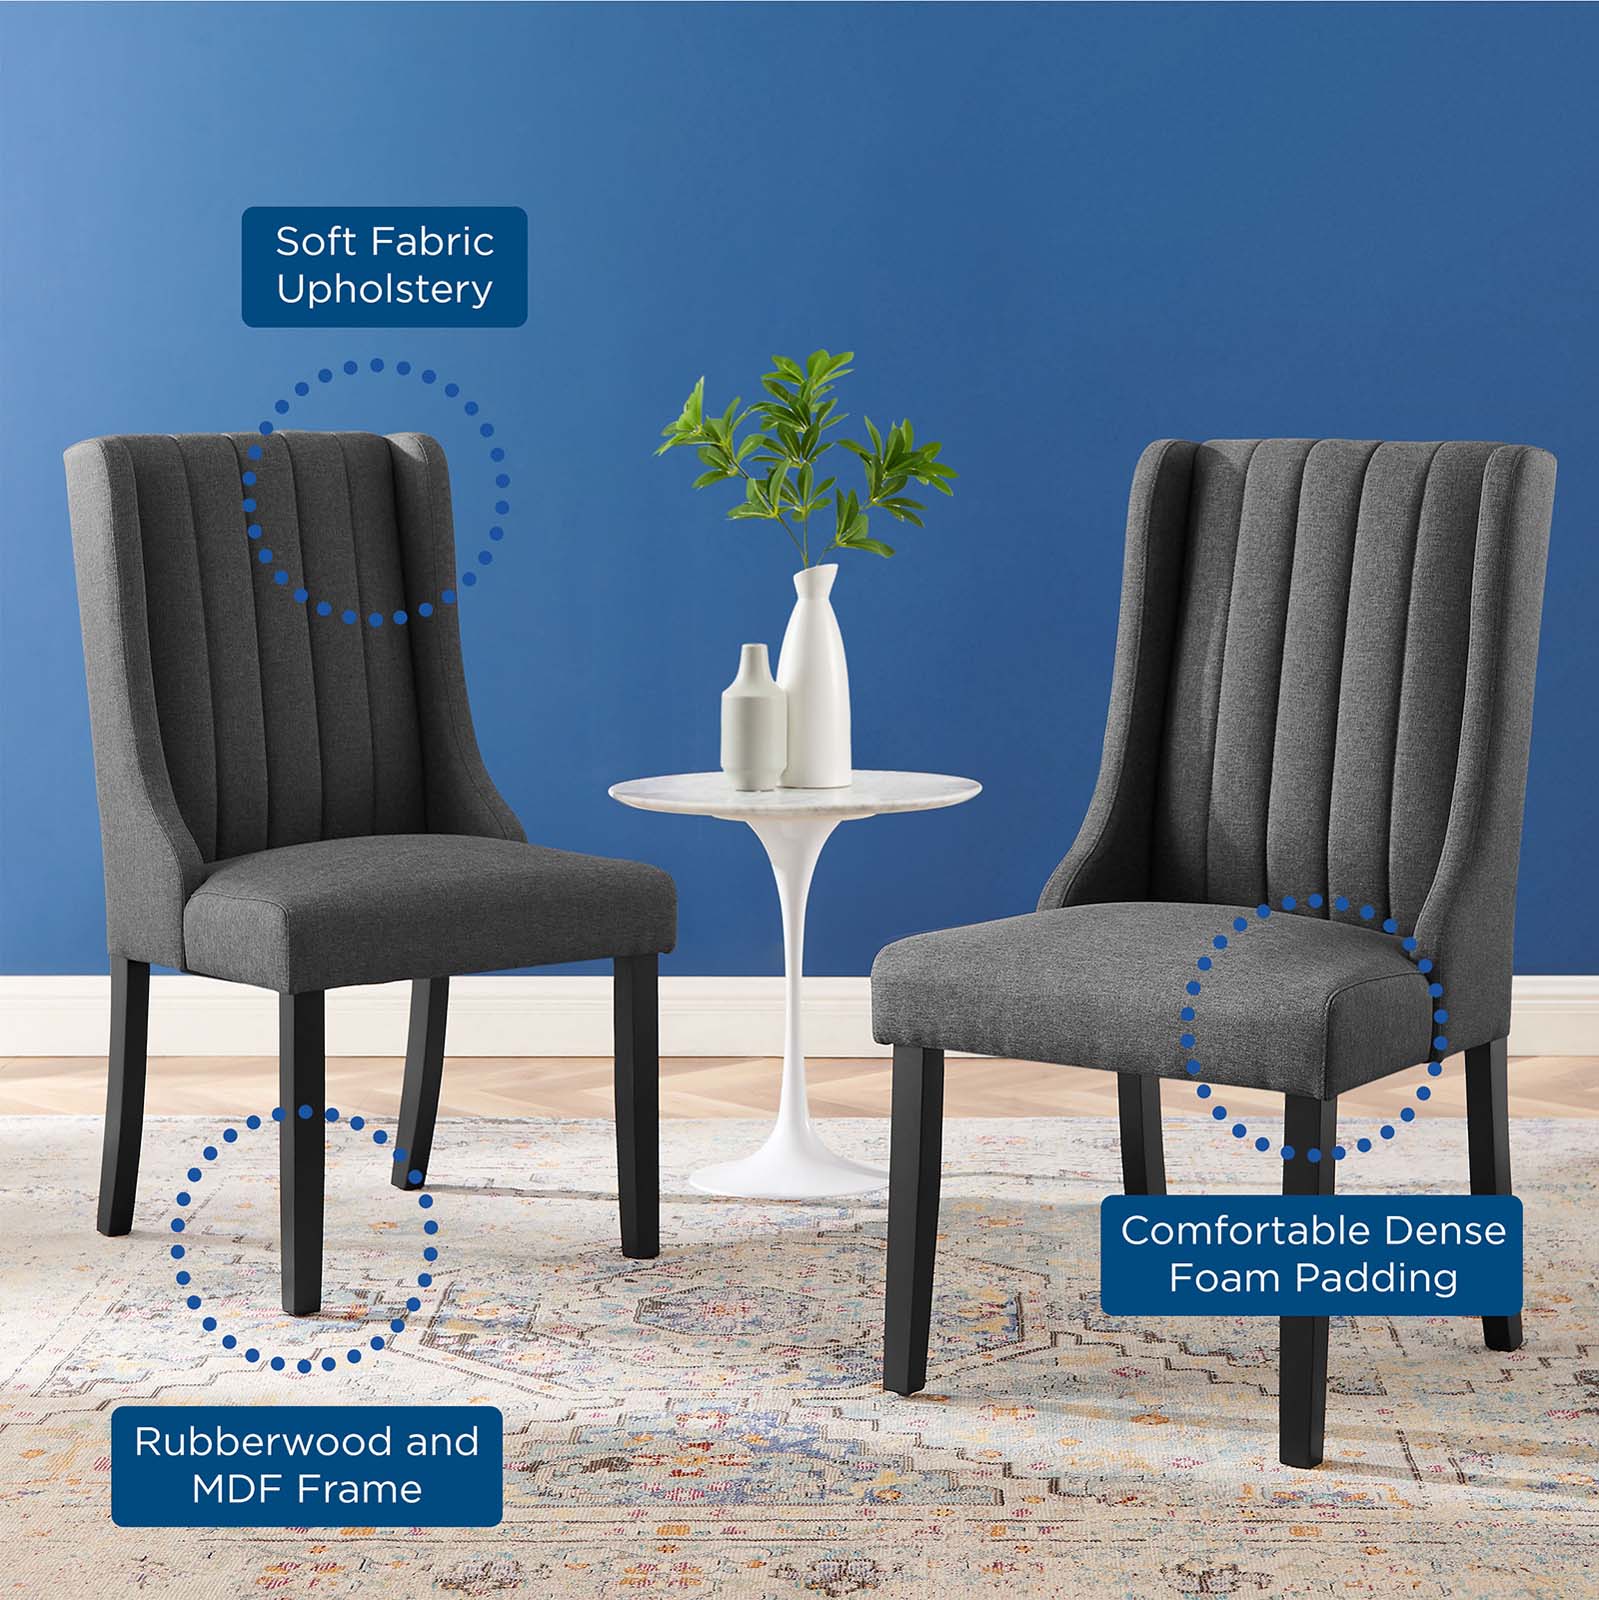 Renew Parsons Fabric Dining Side Chairs - Set of 2